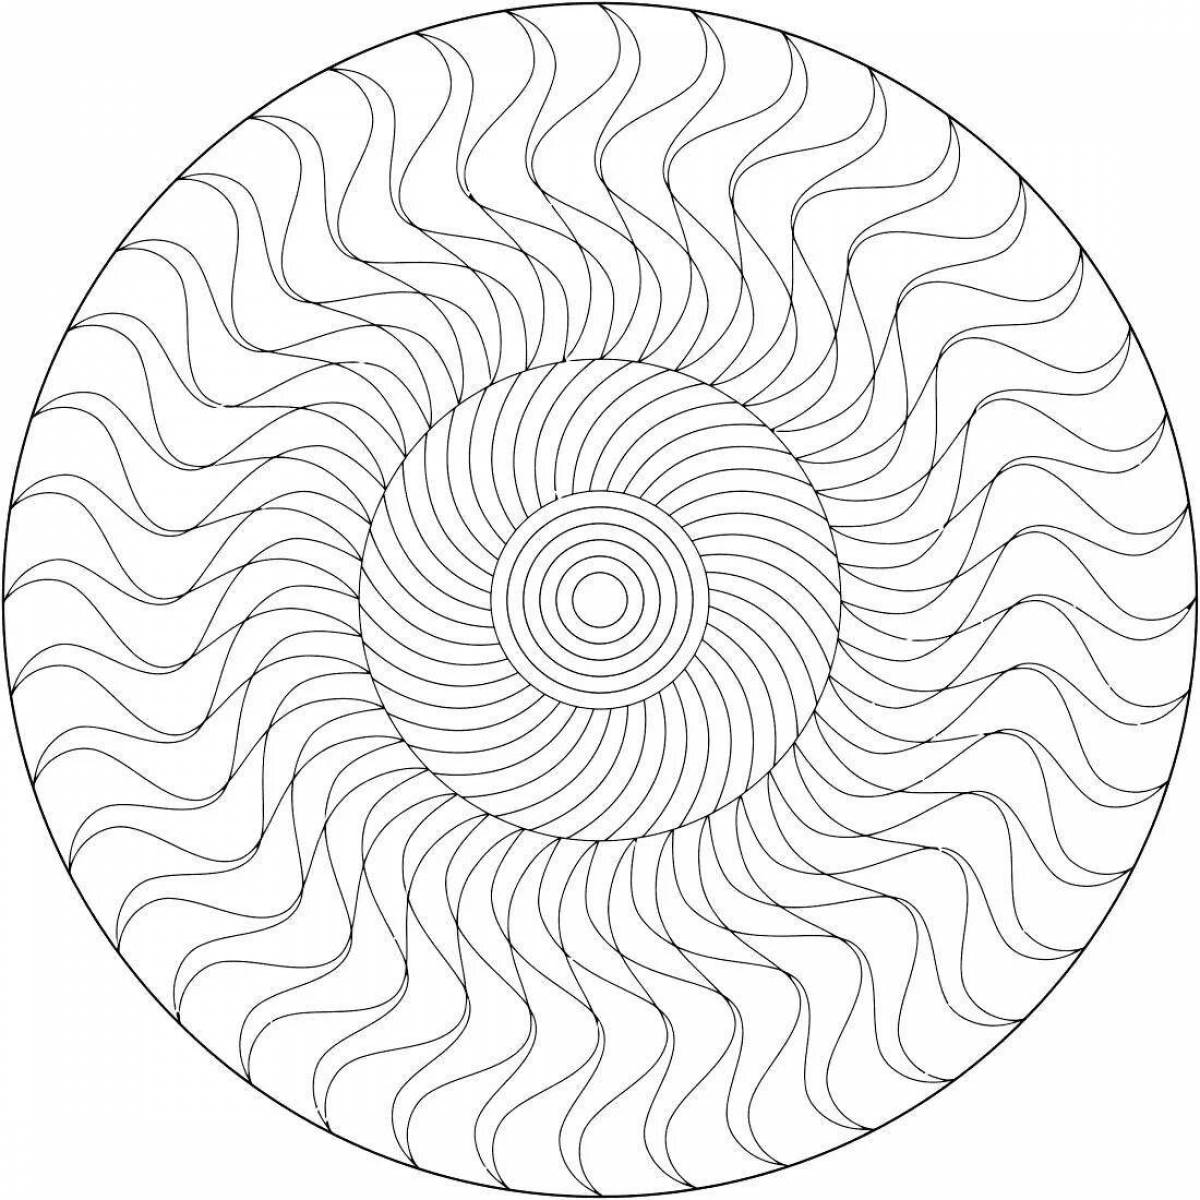 Colorful circular spiral create a coloring page